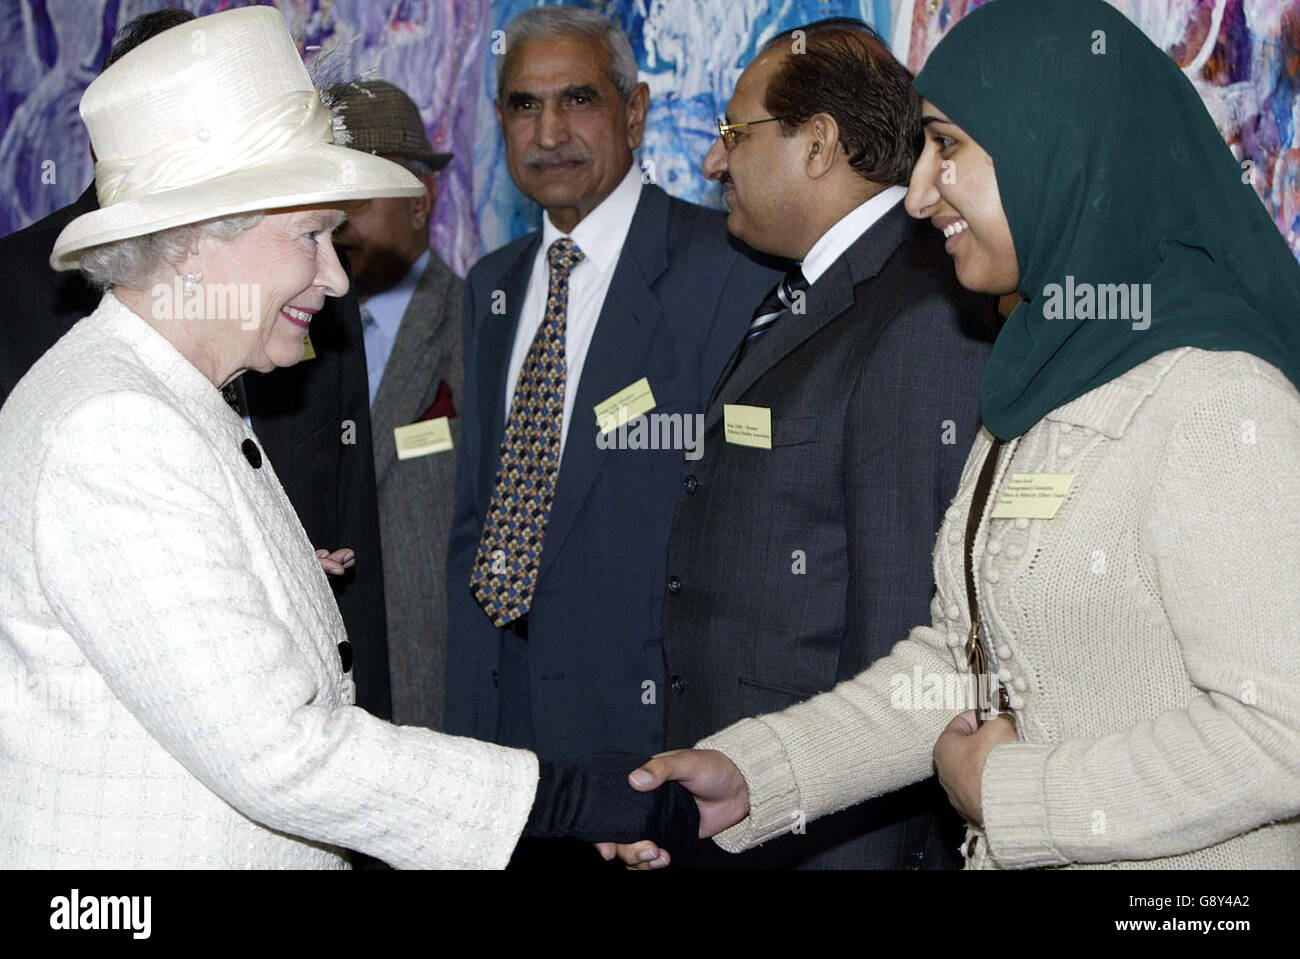 Britain's Queen Elizabeth II meets Eram Javid, a member of the Kashmir comumity at Sage Music Centre in Gateshead, Friday October 14, 2005. See PA Story ROYAL Queen. PRESS ASSOCIATION Photo. Photo credit should read: Owen Humphreys/PA/WPA Rota Stock Photo